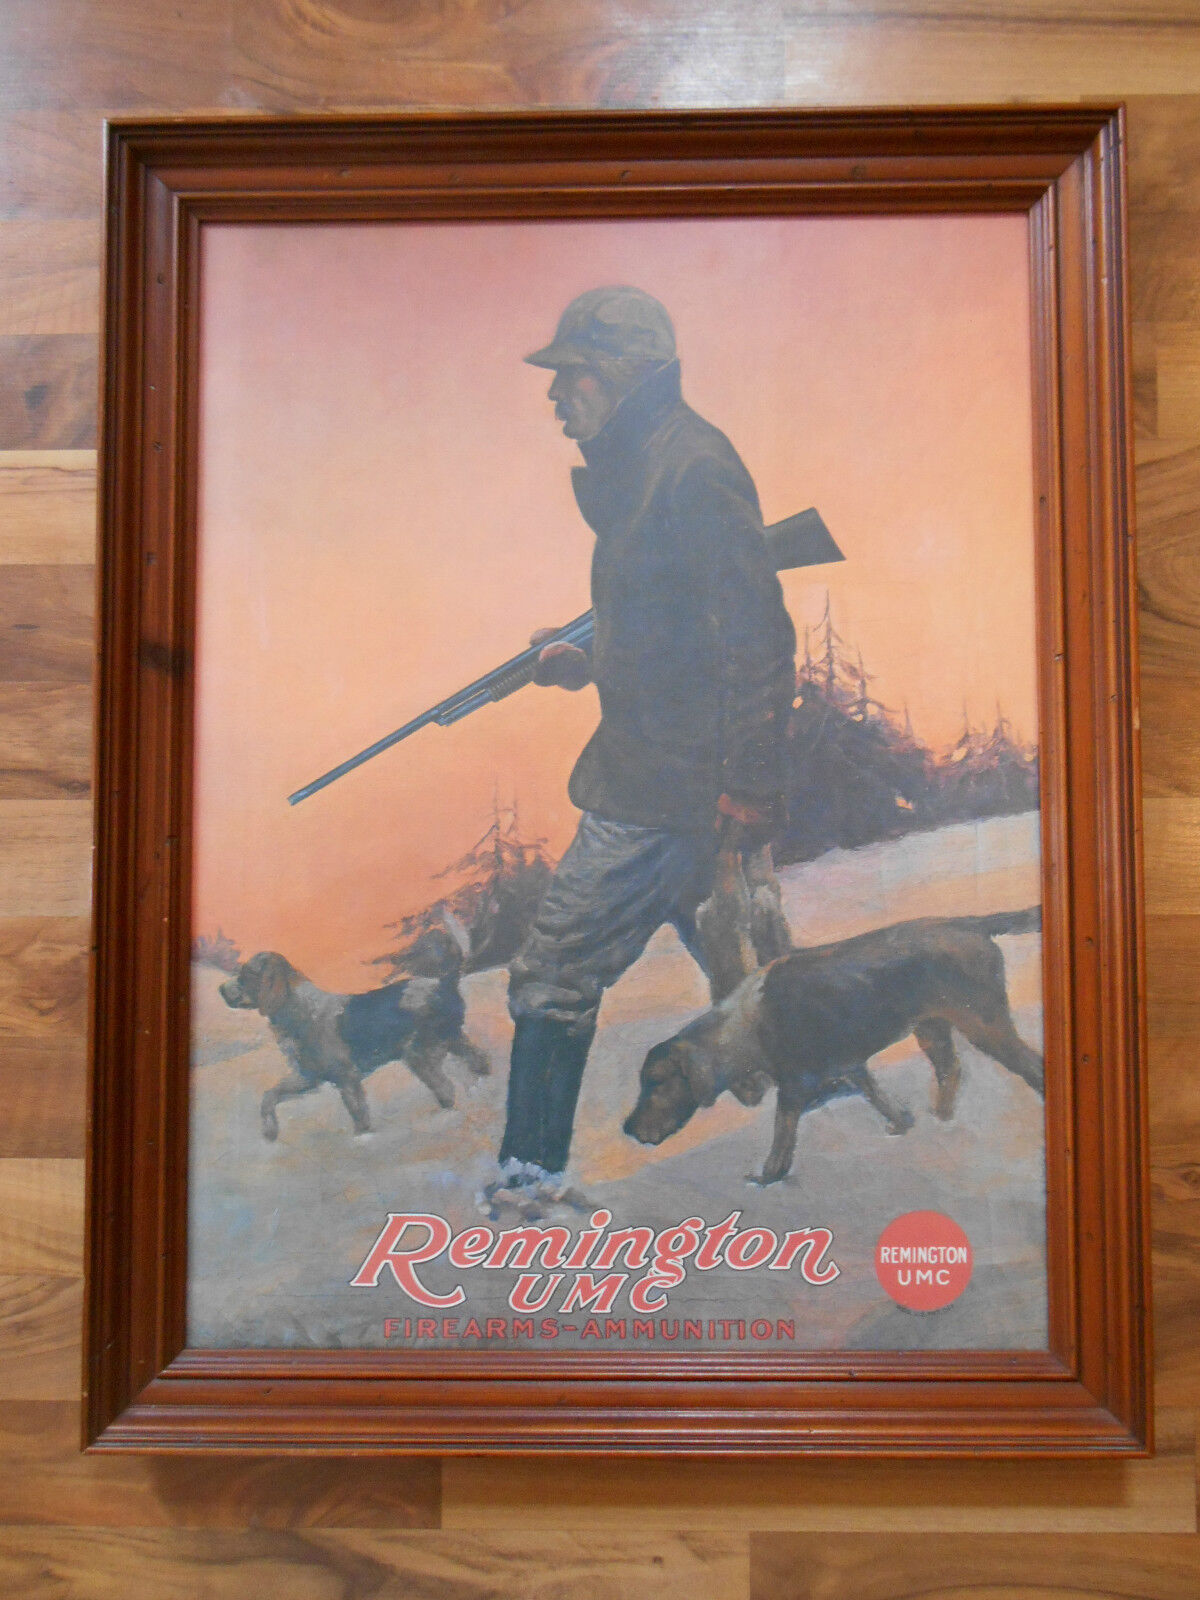 Old Vintage Advertising Framed Print Picture Remington UMC Firearms Hunting Dogs